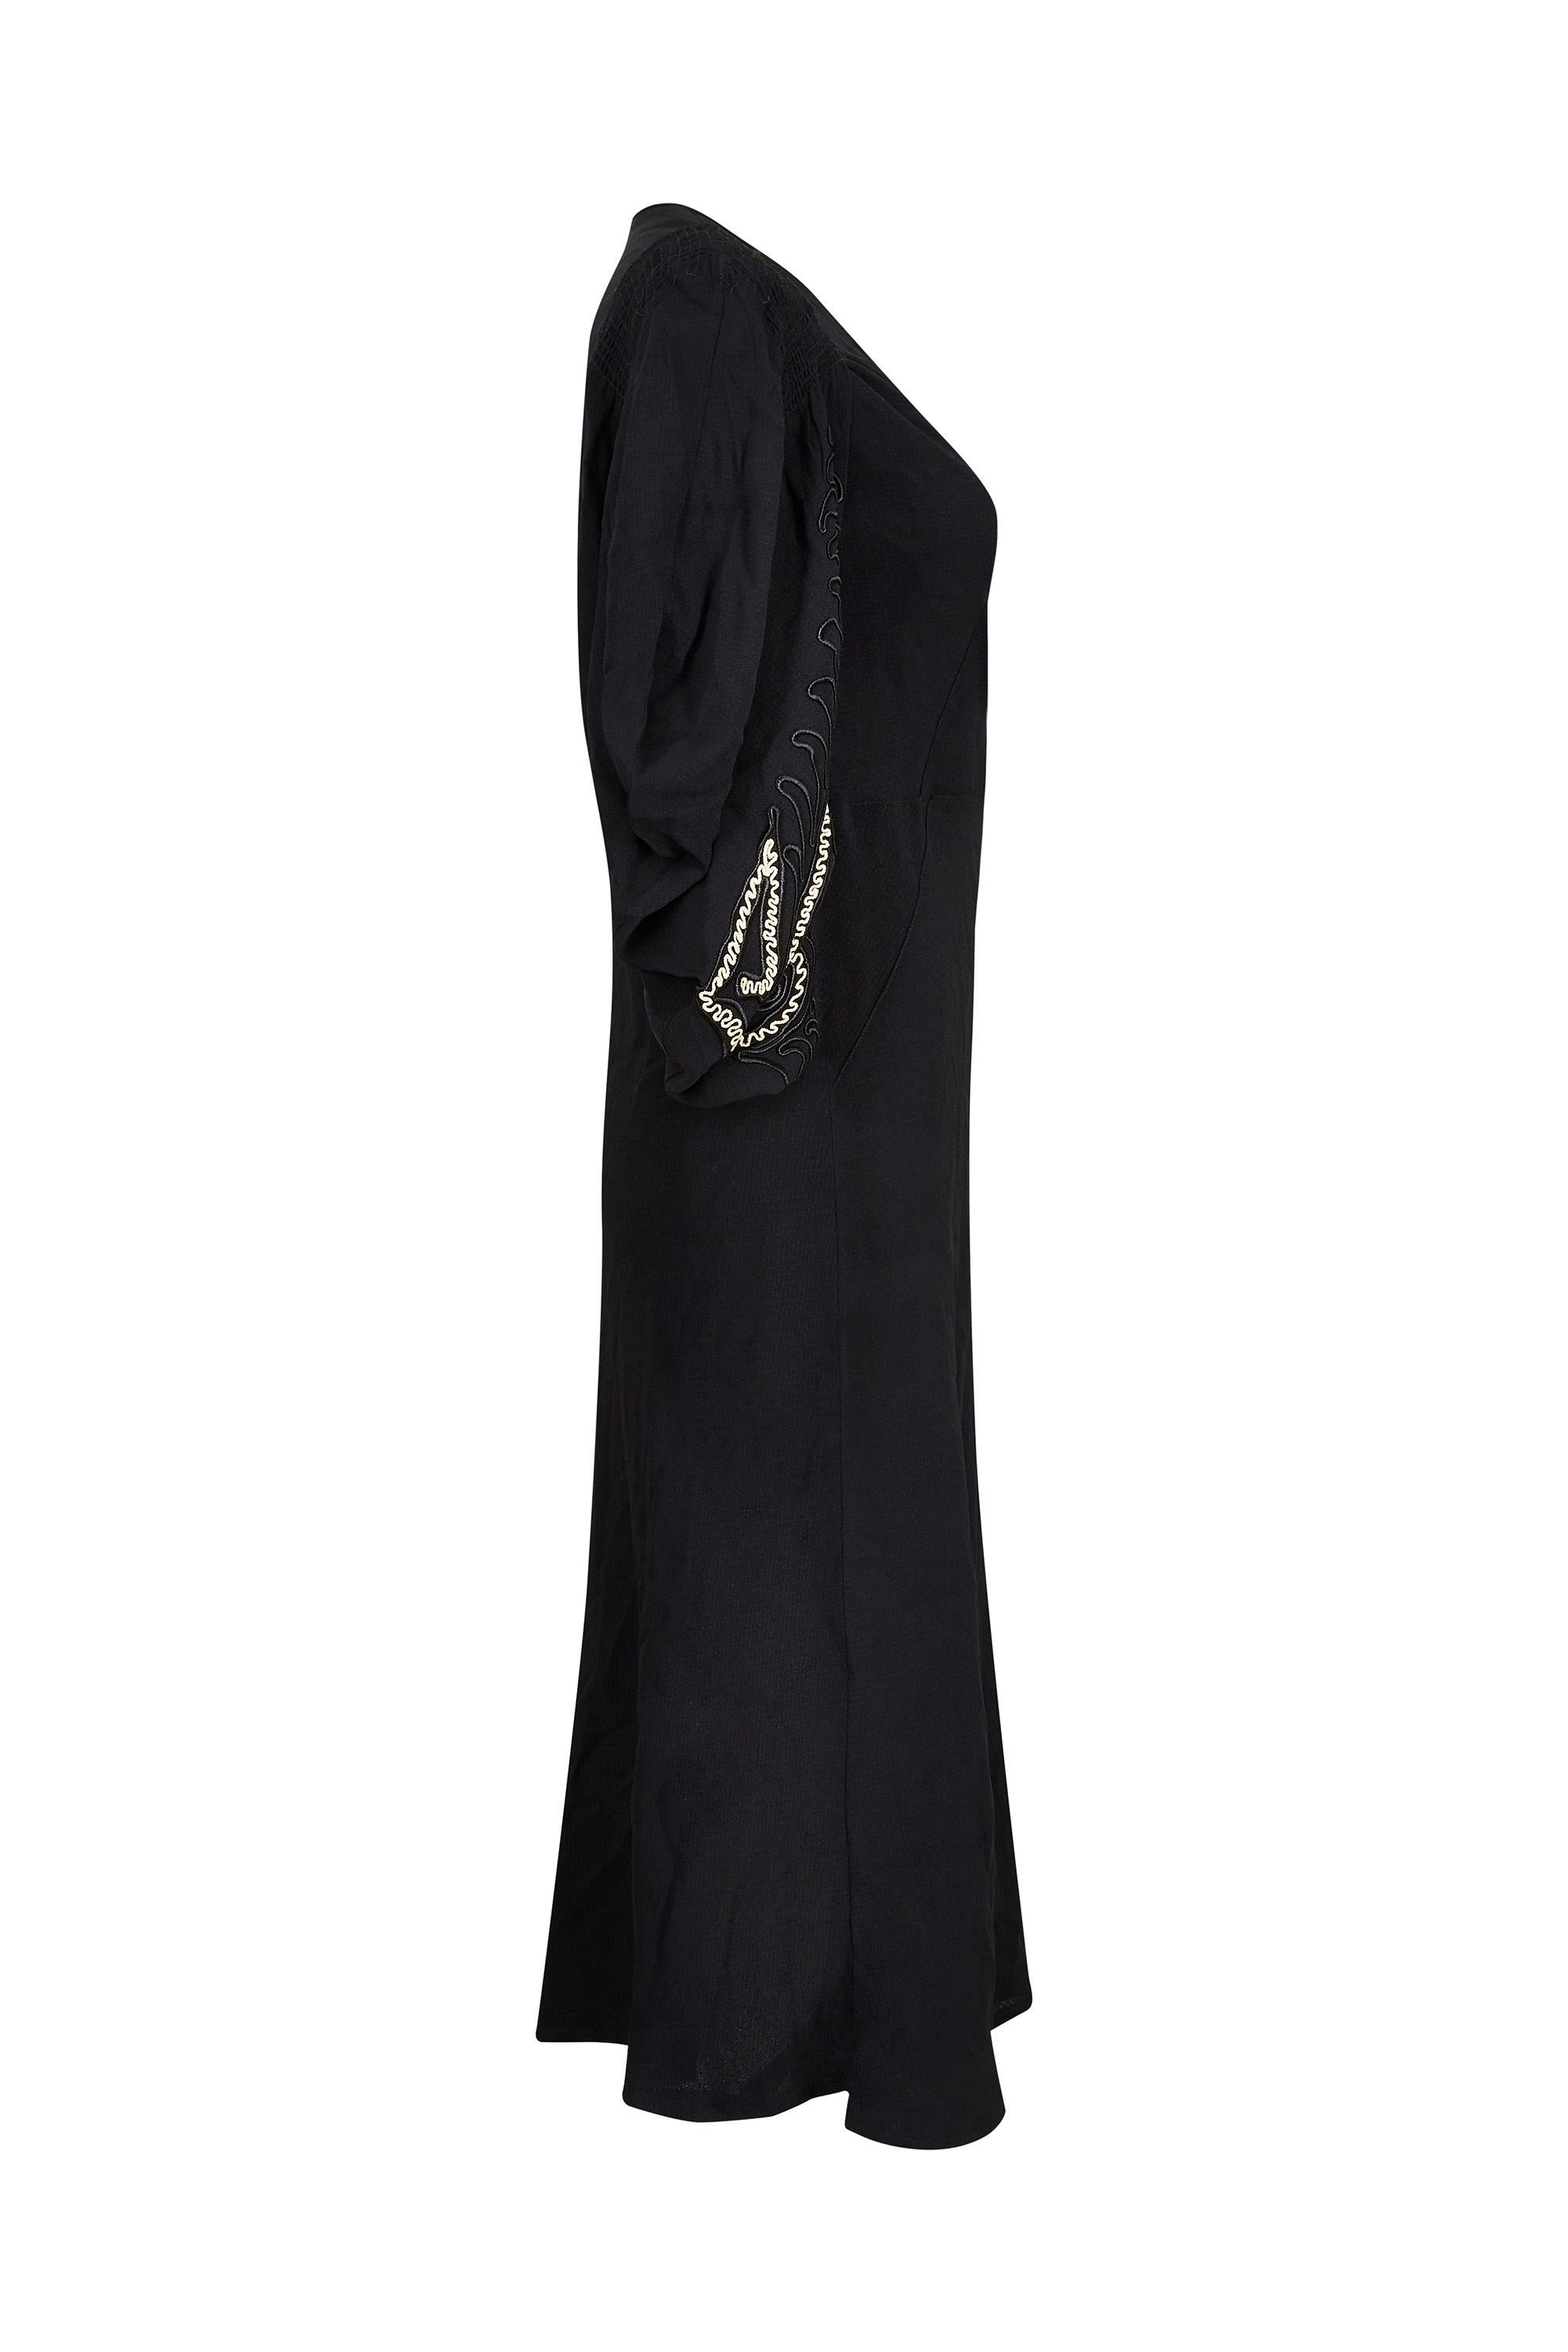 This striking 1930s black silk crepe gown with embroider kimono style sleeves is in superb vintage condition with some lovely design features. The dress is a designed to be a lose fit and is reminiscent of the flapper style however there are details